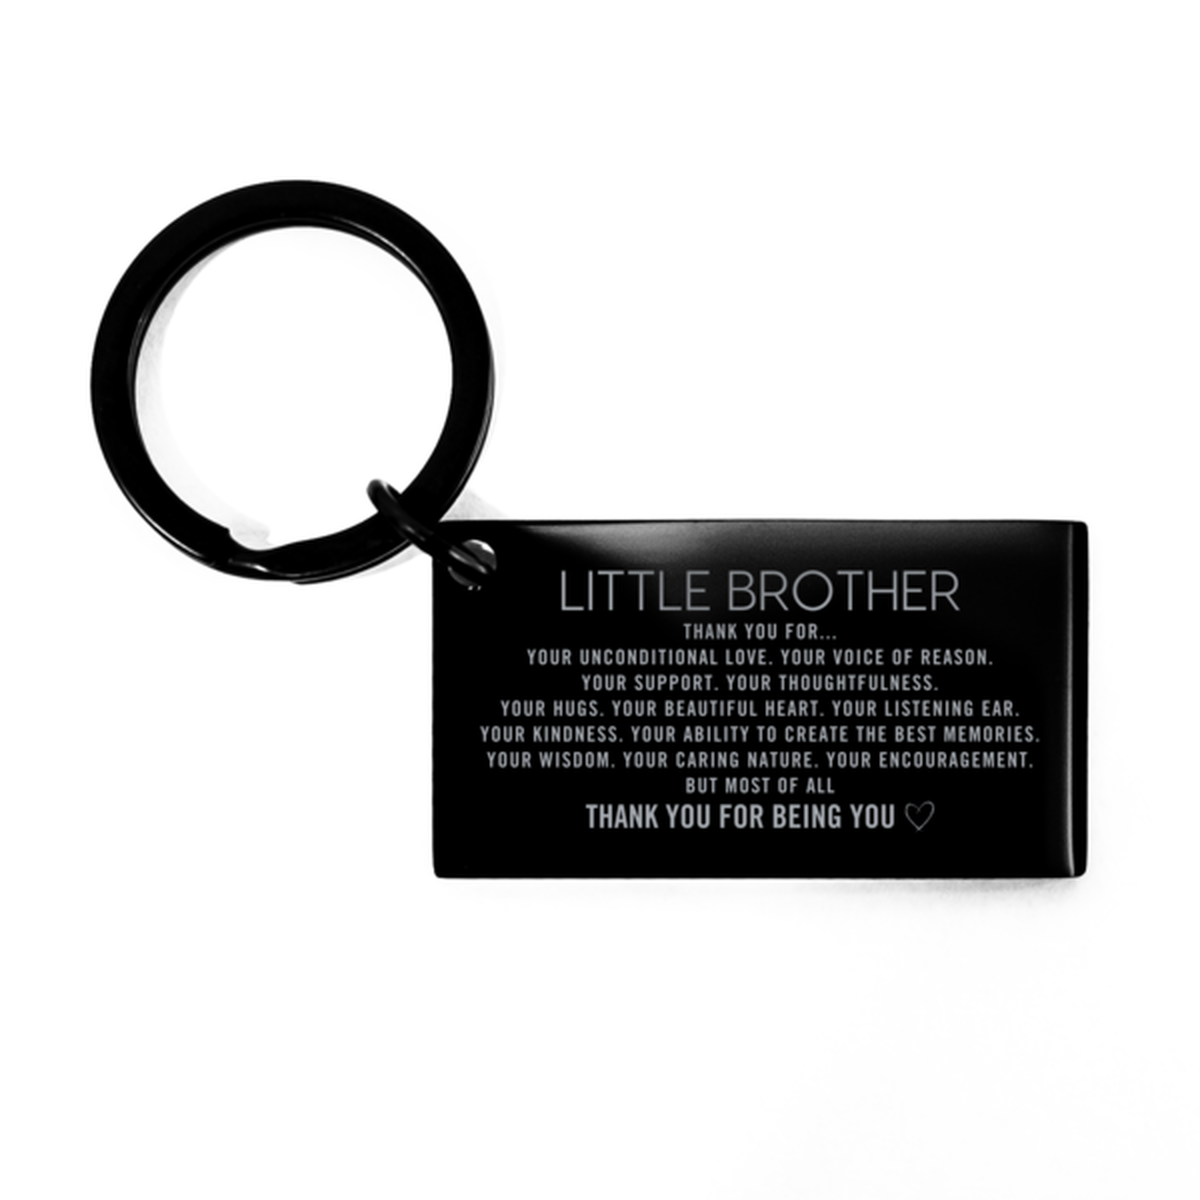 Little Brother Keychain Custom, Engraved Gifts For Little Brother Christmas Graduation Birthday Gifts for Men Women Little Brother Thank you for Your unconditional love